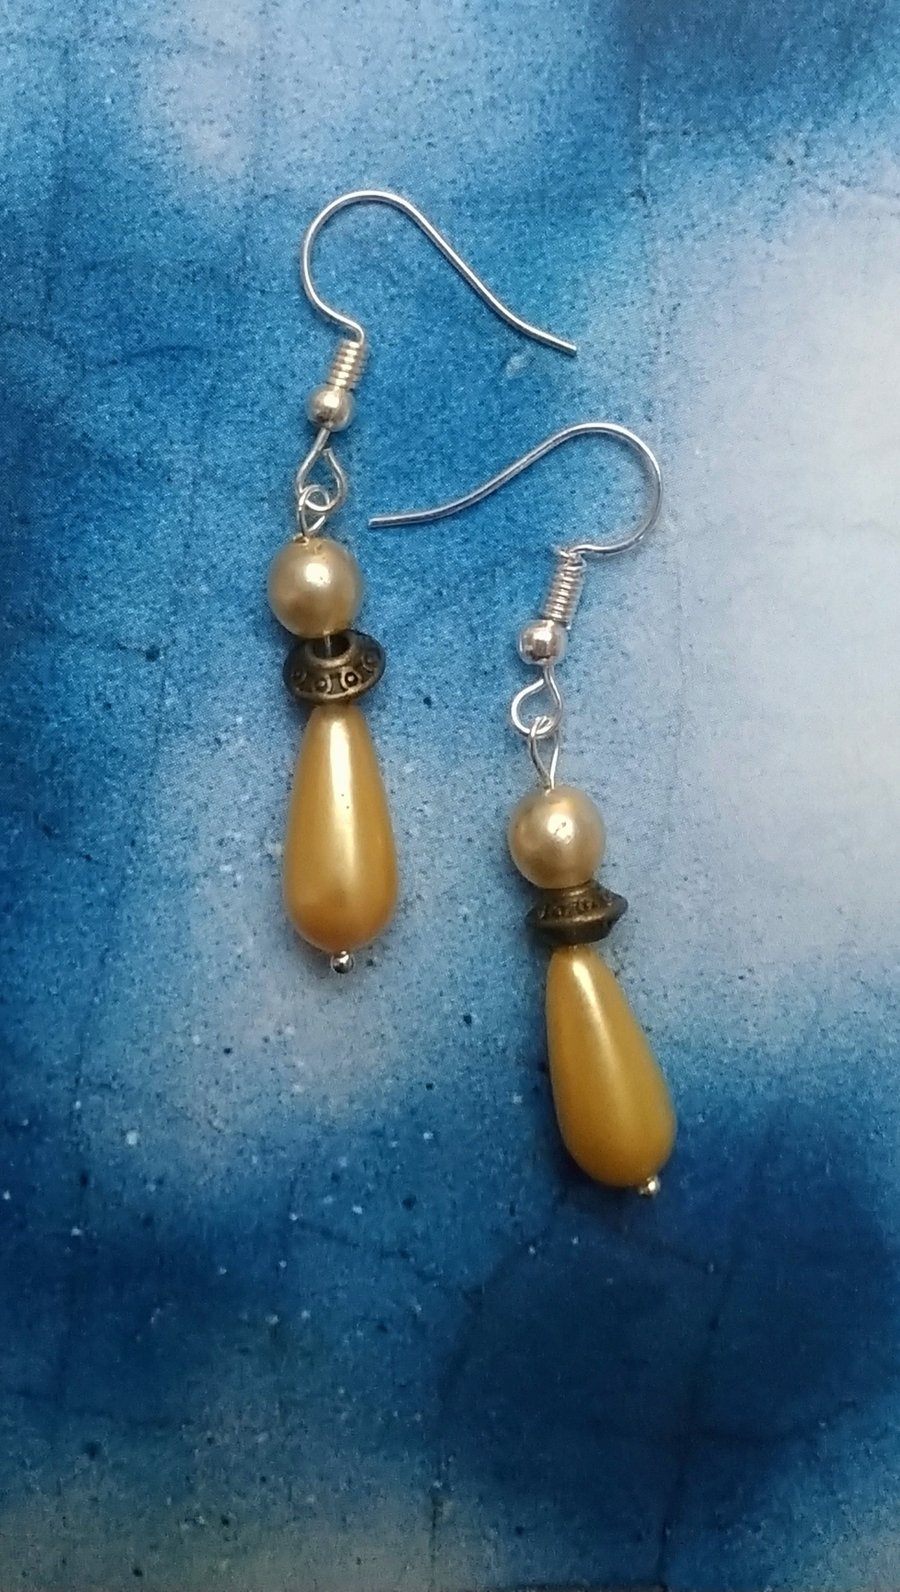 Pearlised Drop Earrings with Antique Gold